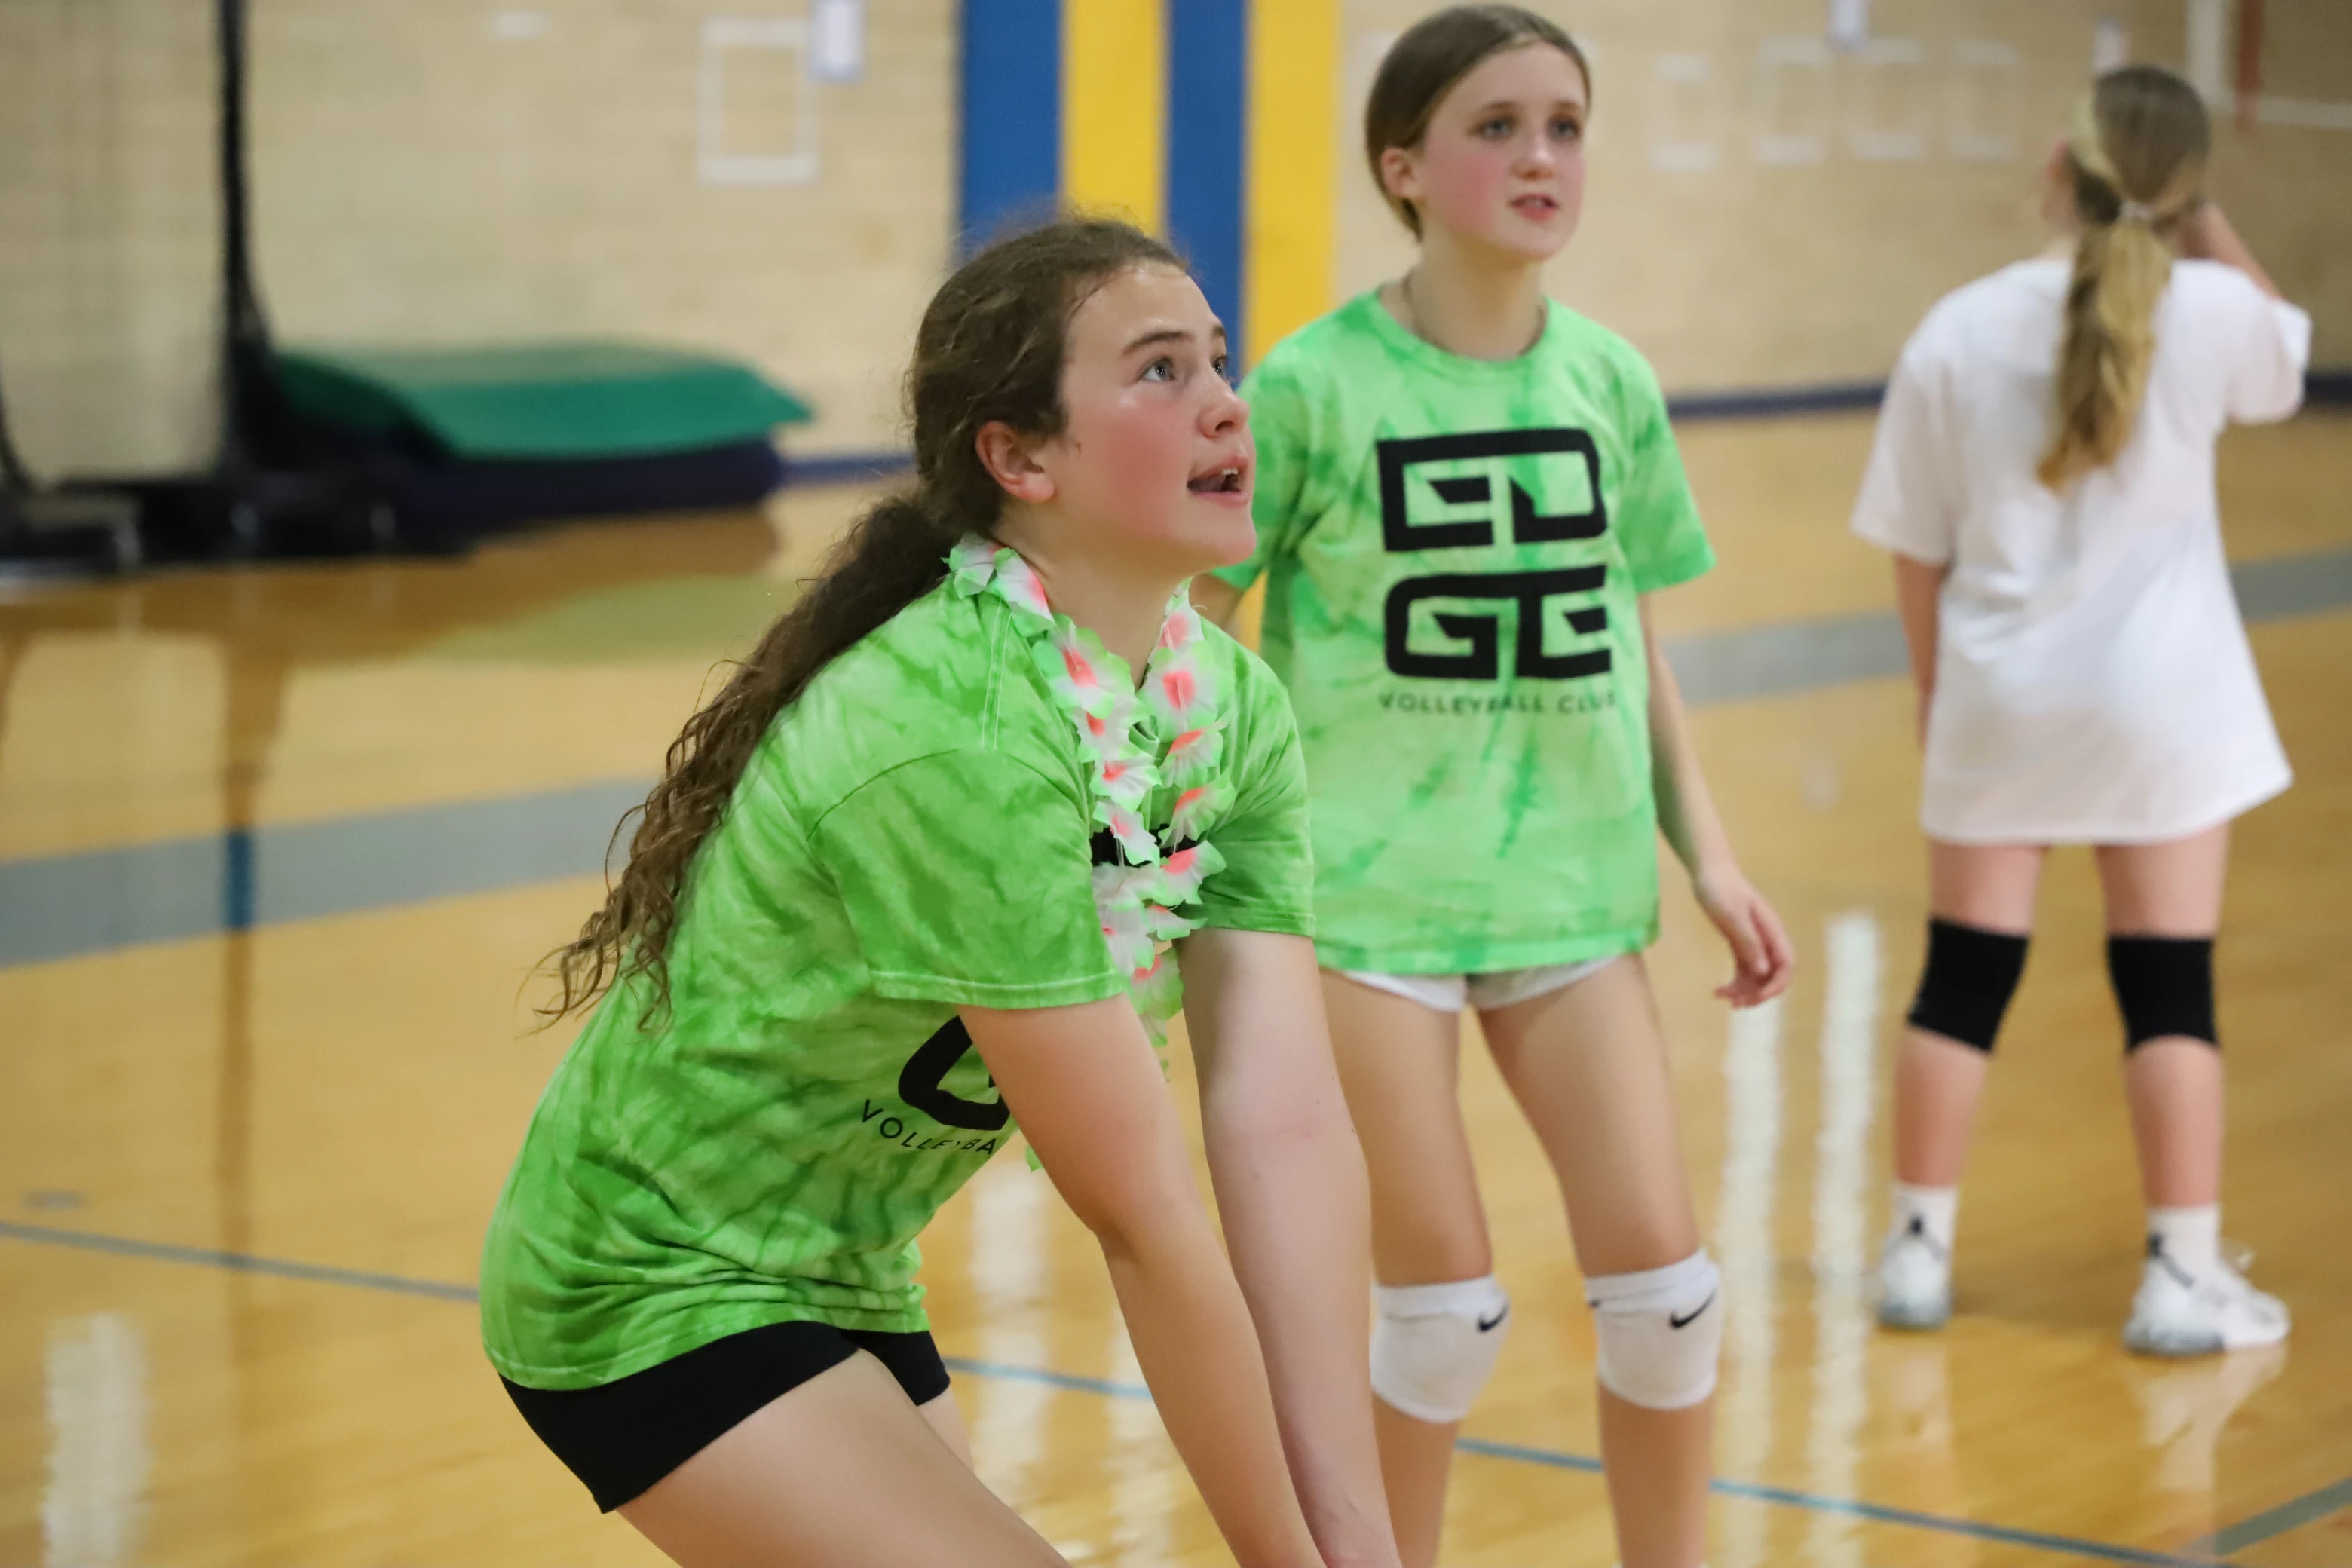 An Edge athlete playing volleyball while wearing all green in support for mental health awareness